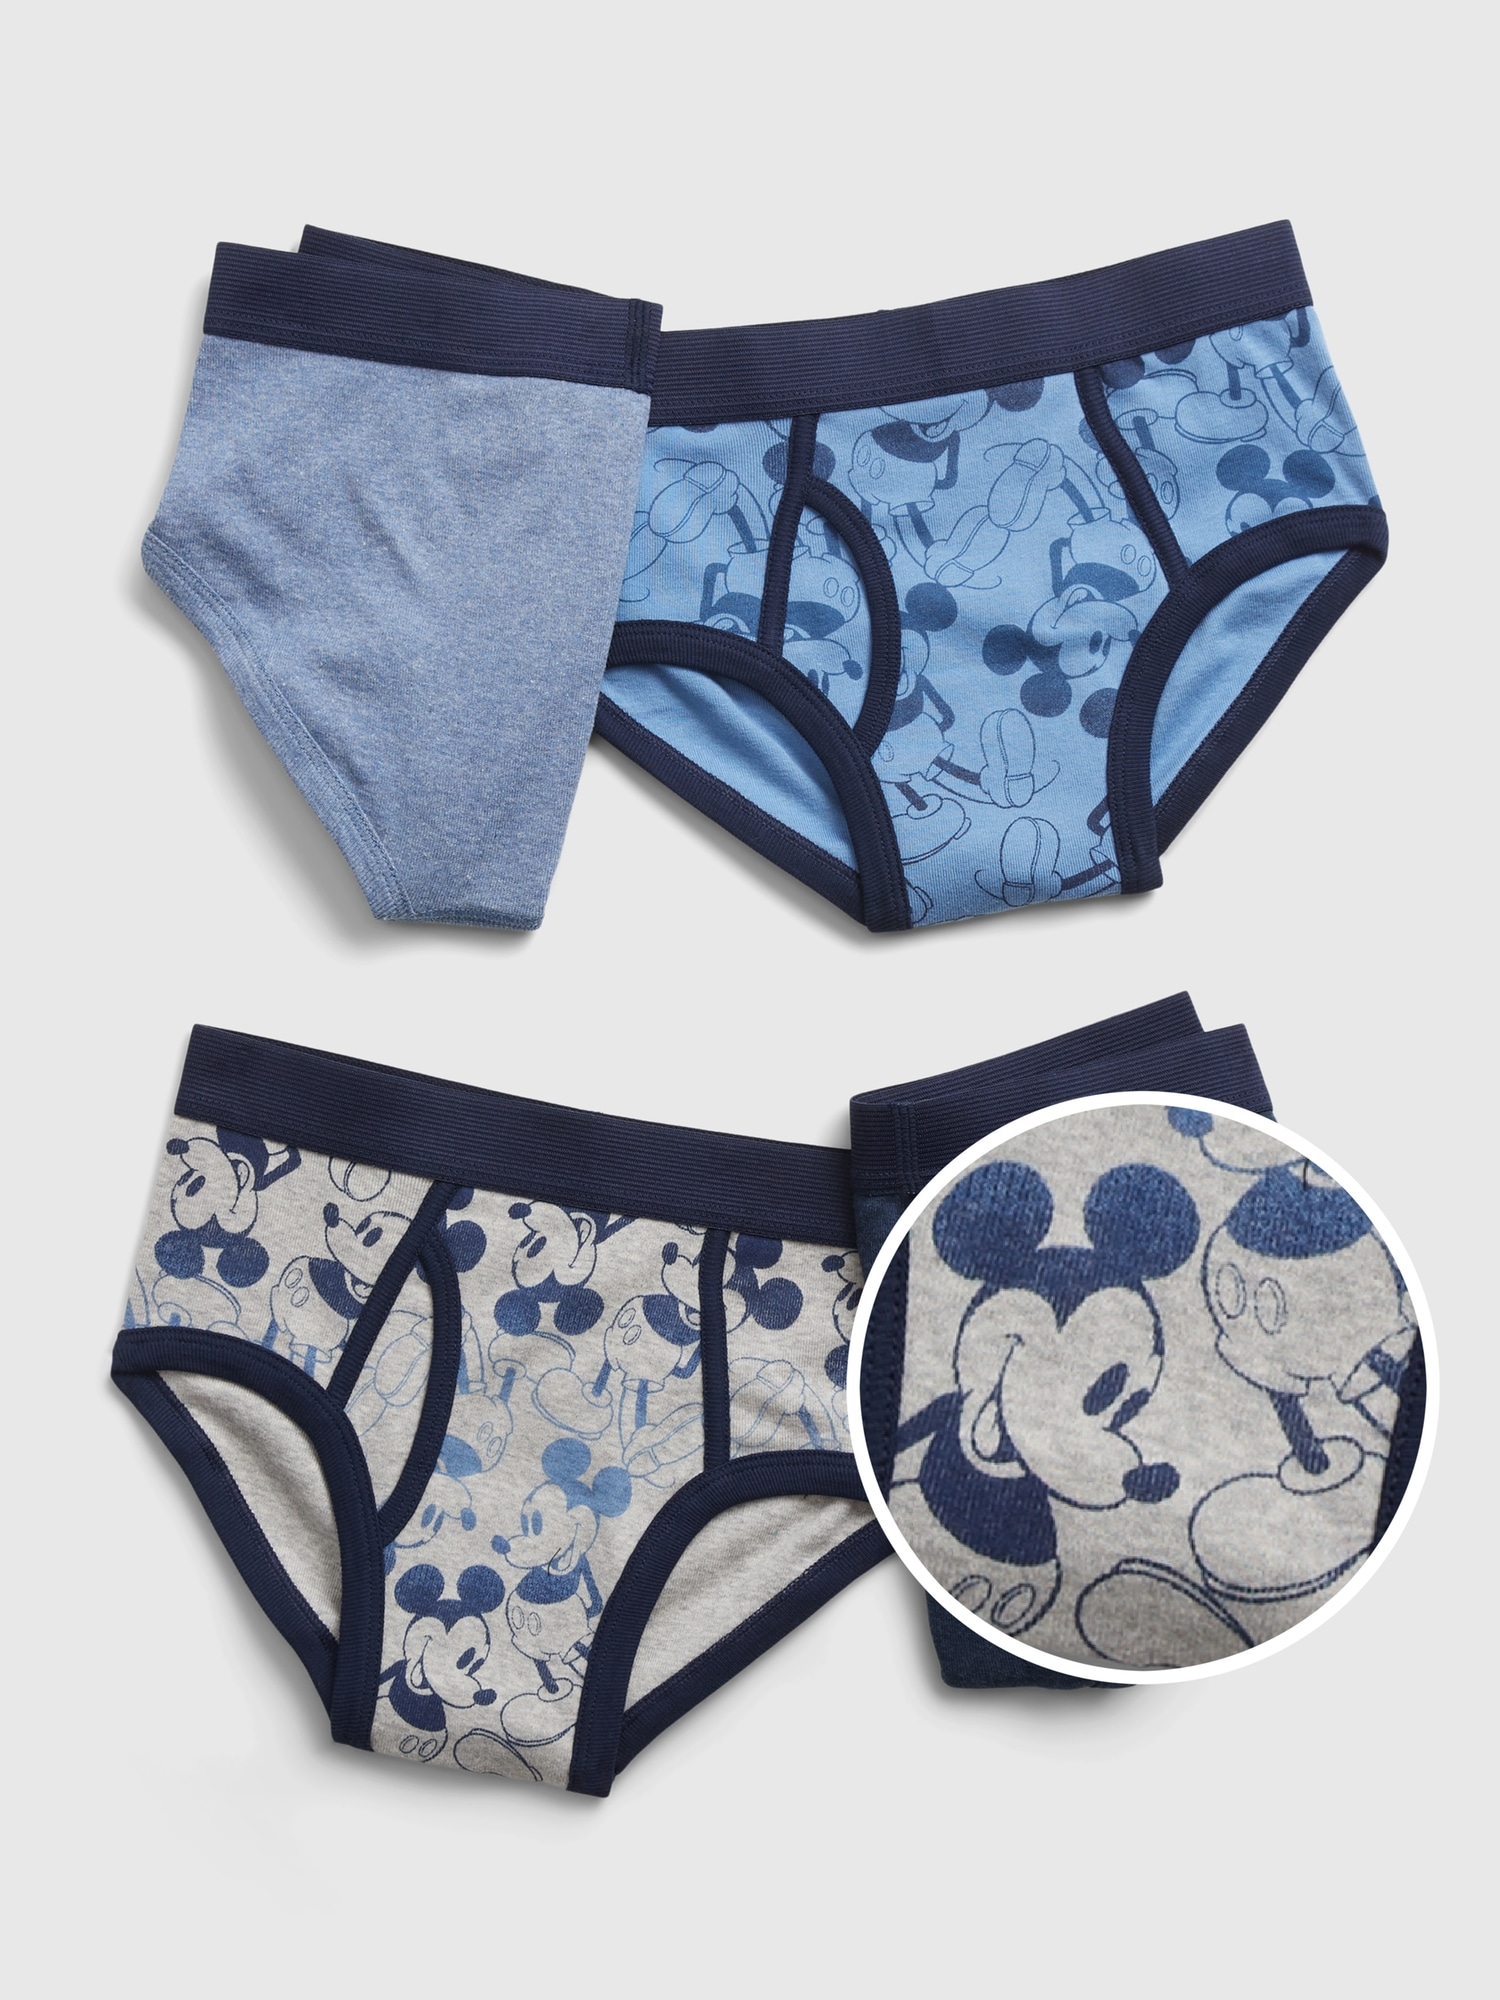 Briefs, Mickey Mouse, 8-10 Years - Inner Wear & Thermals Online